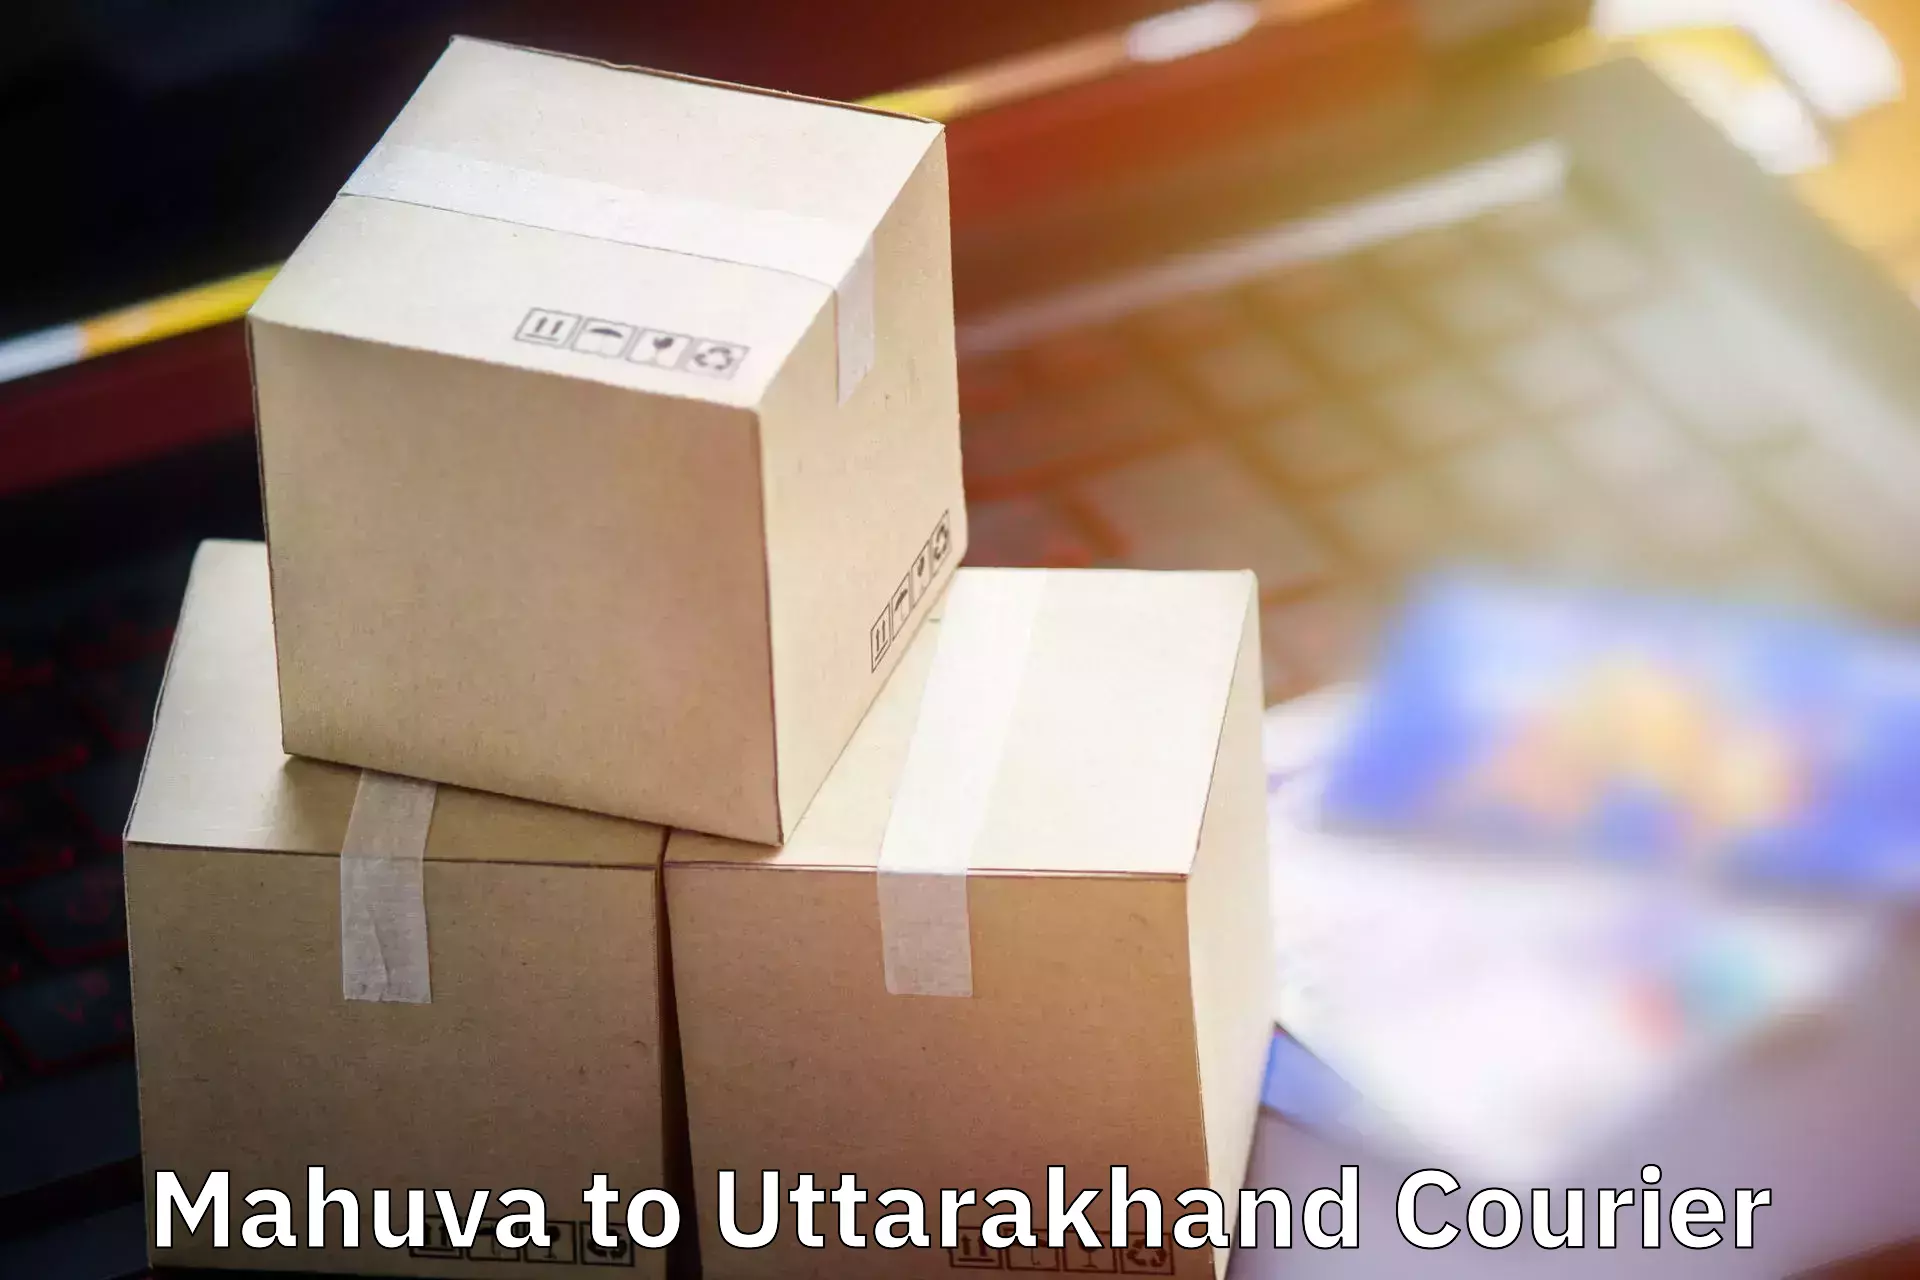 Personal effects shipping Mahuva to Rudrapur